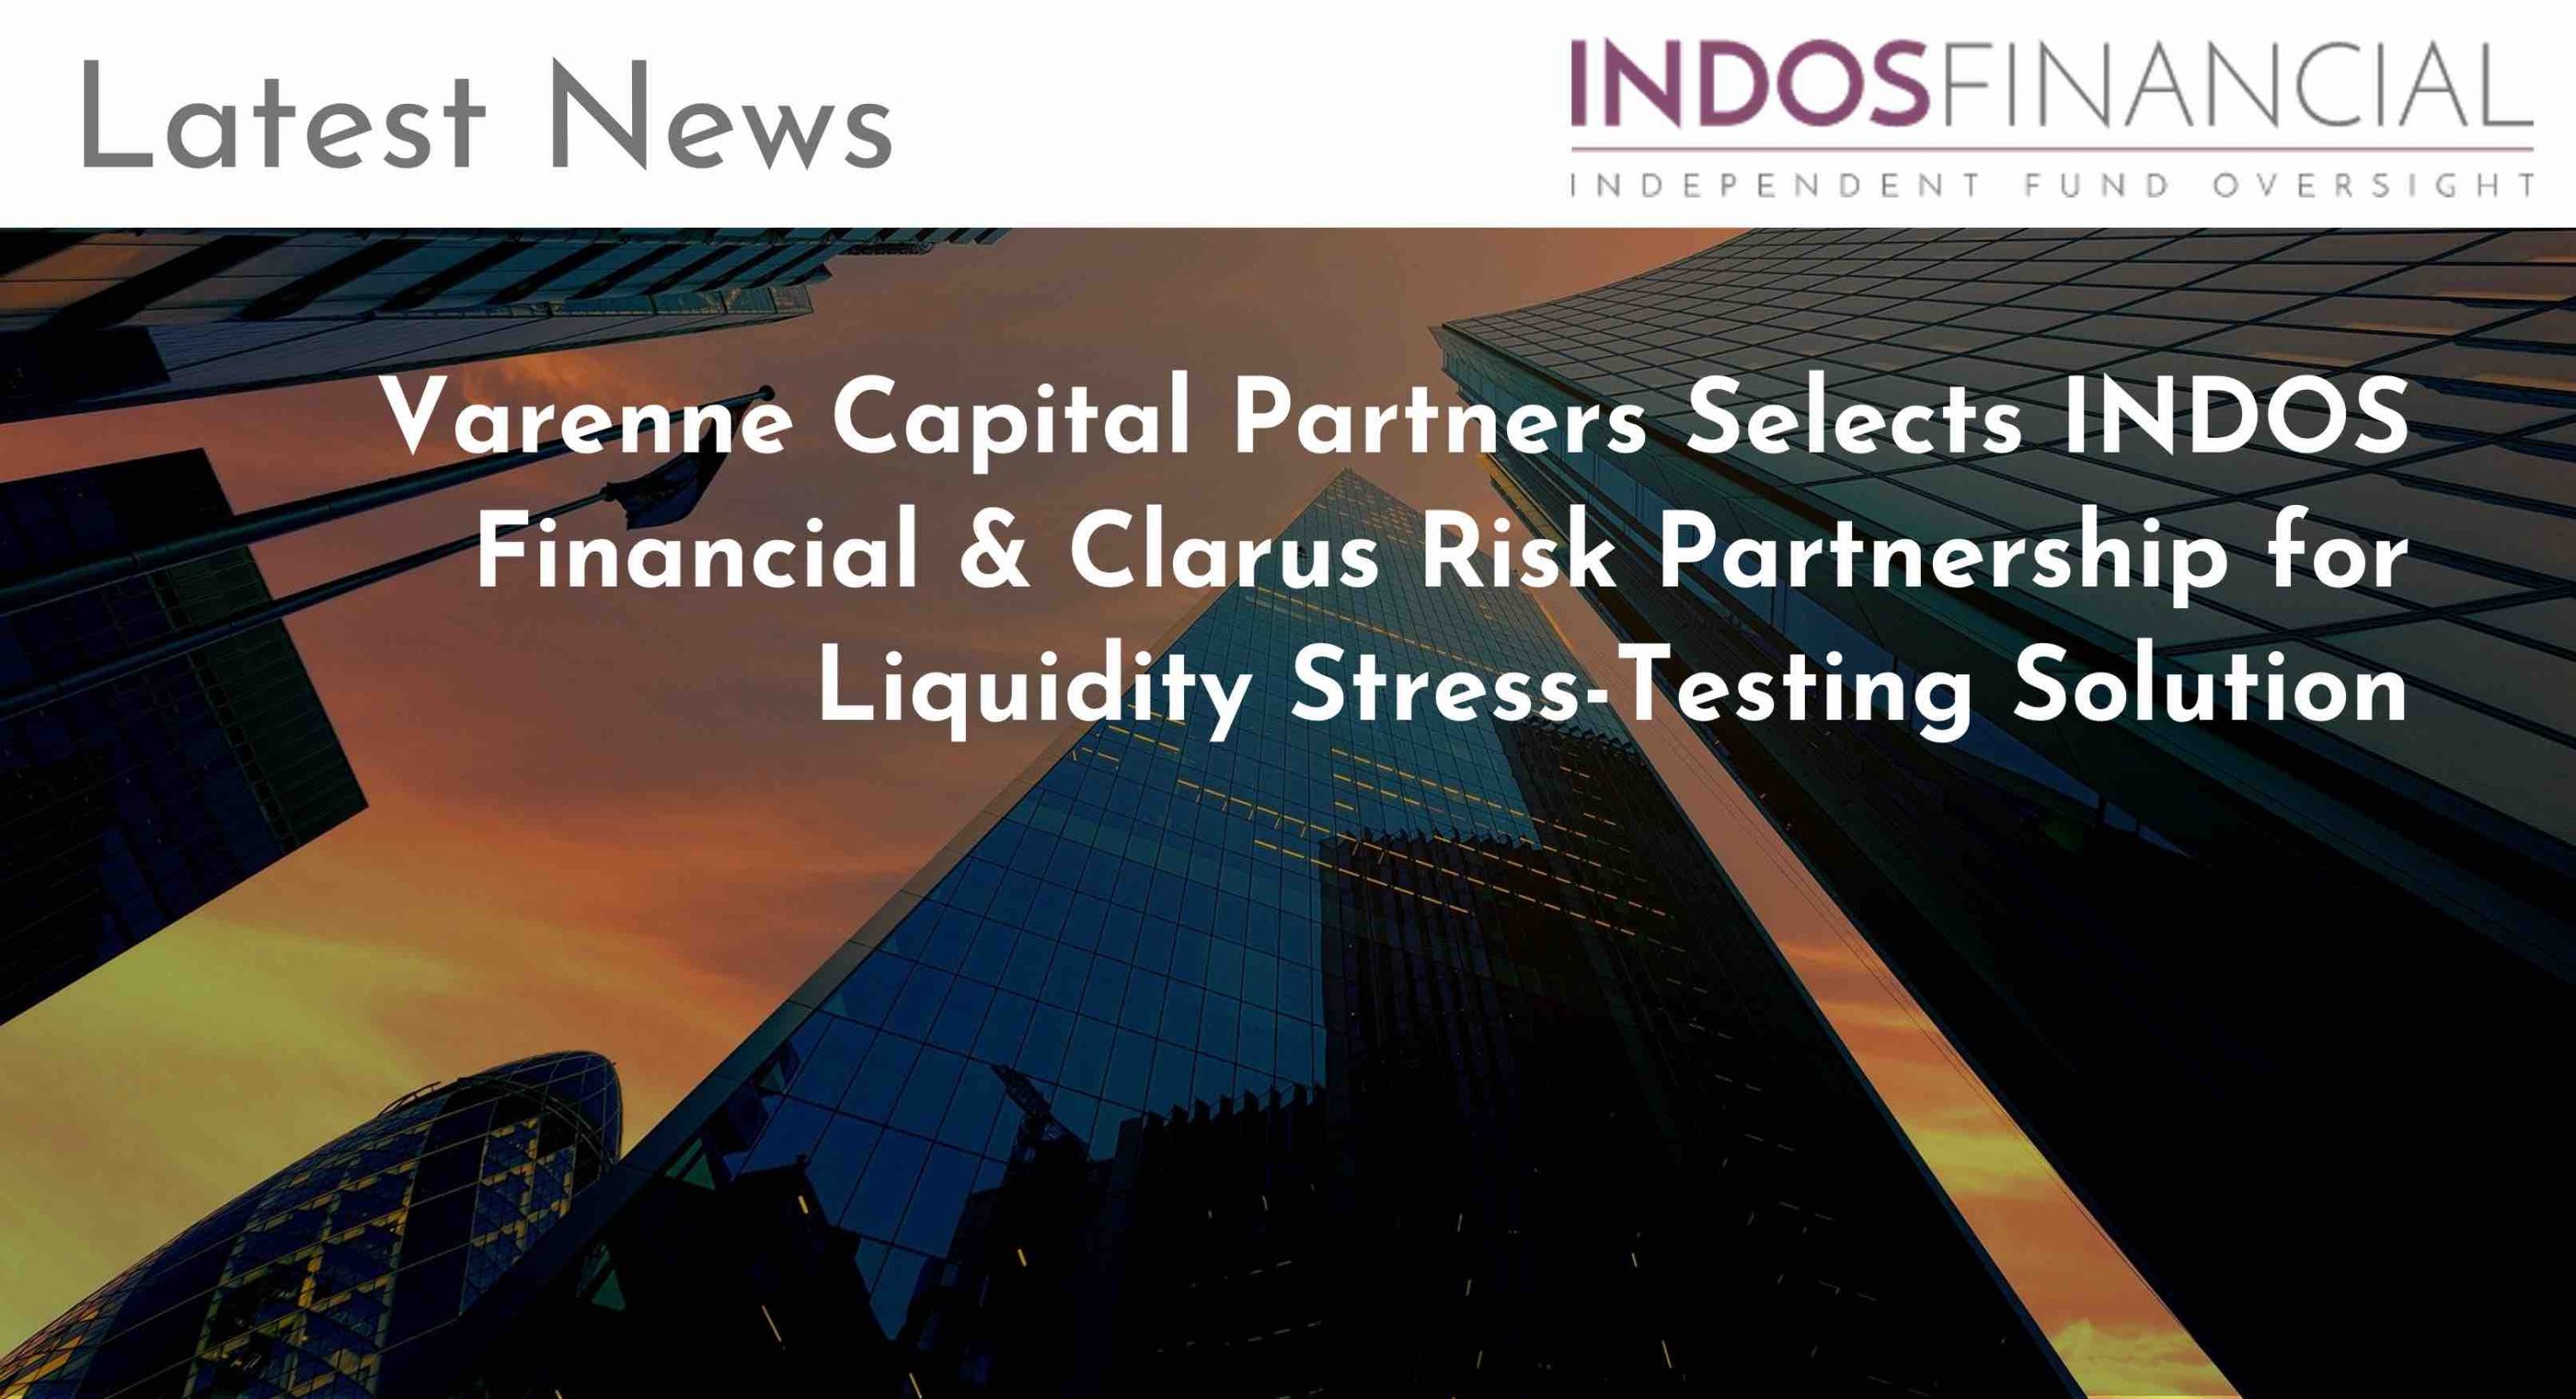 Varenne Capital Partners Selects INDOS Financial & Clarus Risk Partnership for Liquidity Stress-Testing Solution